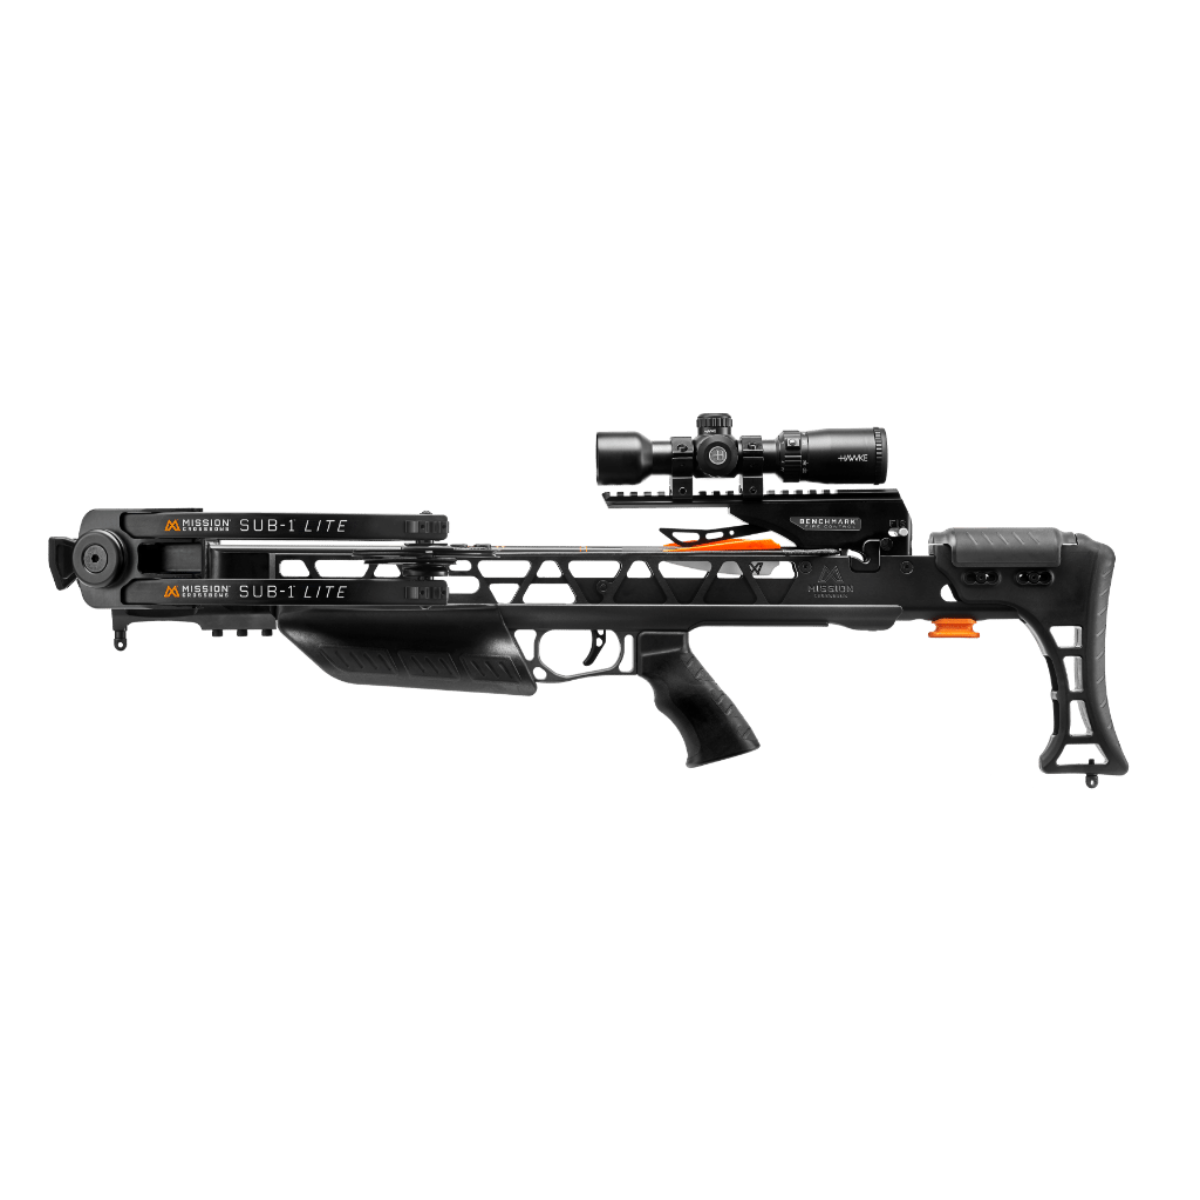 Mission SUB-1 Lite Crossbow Package